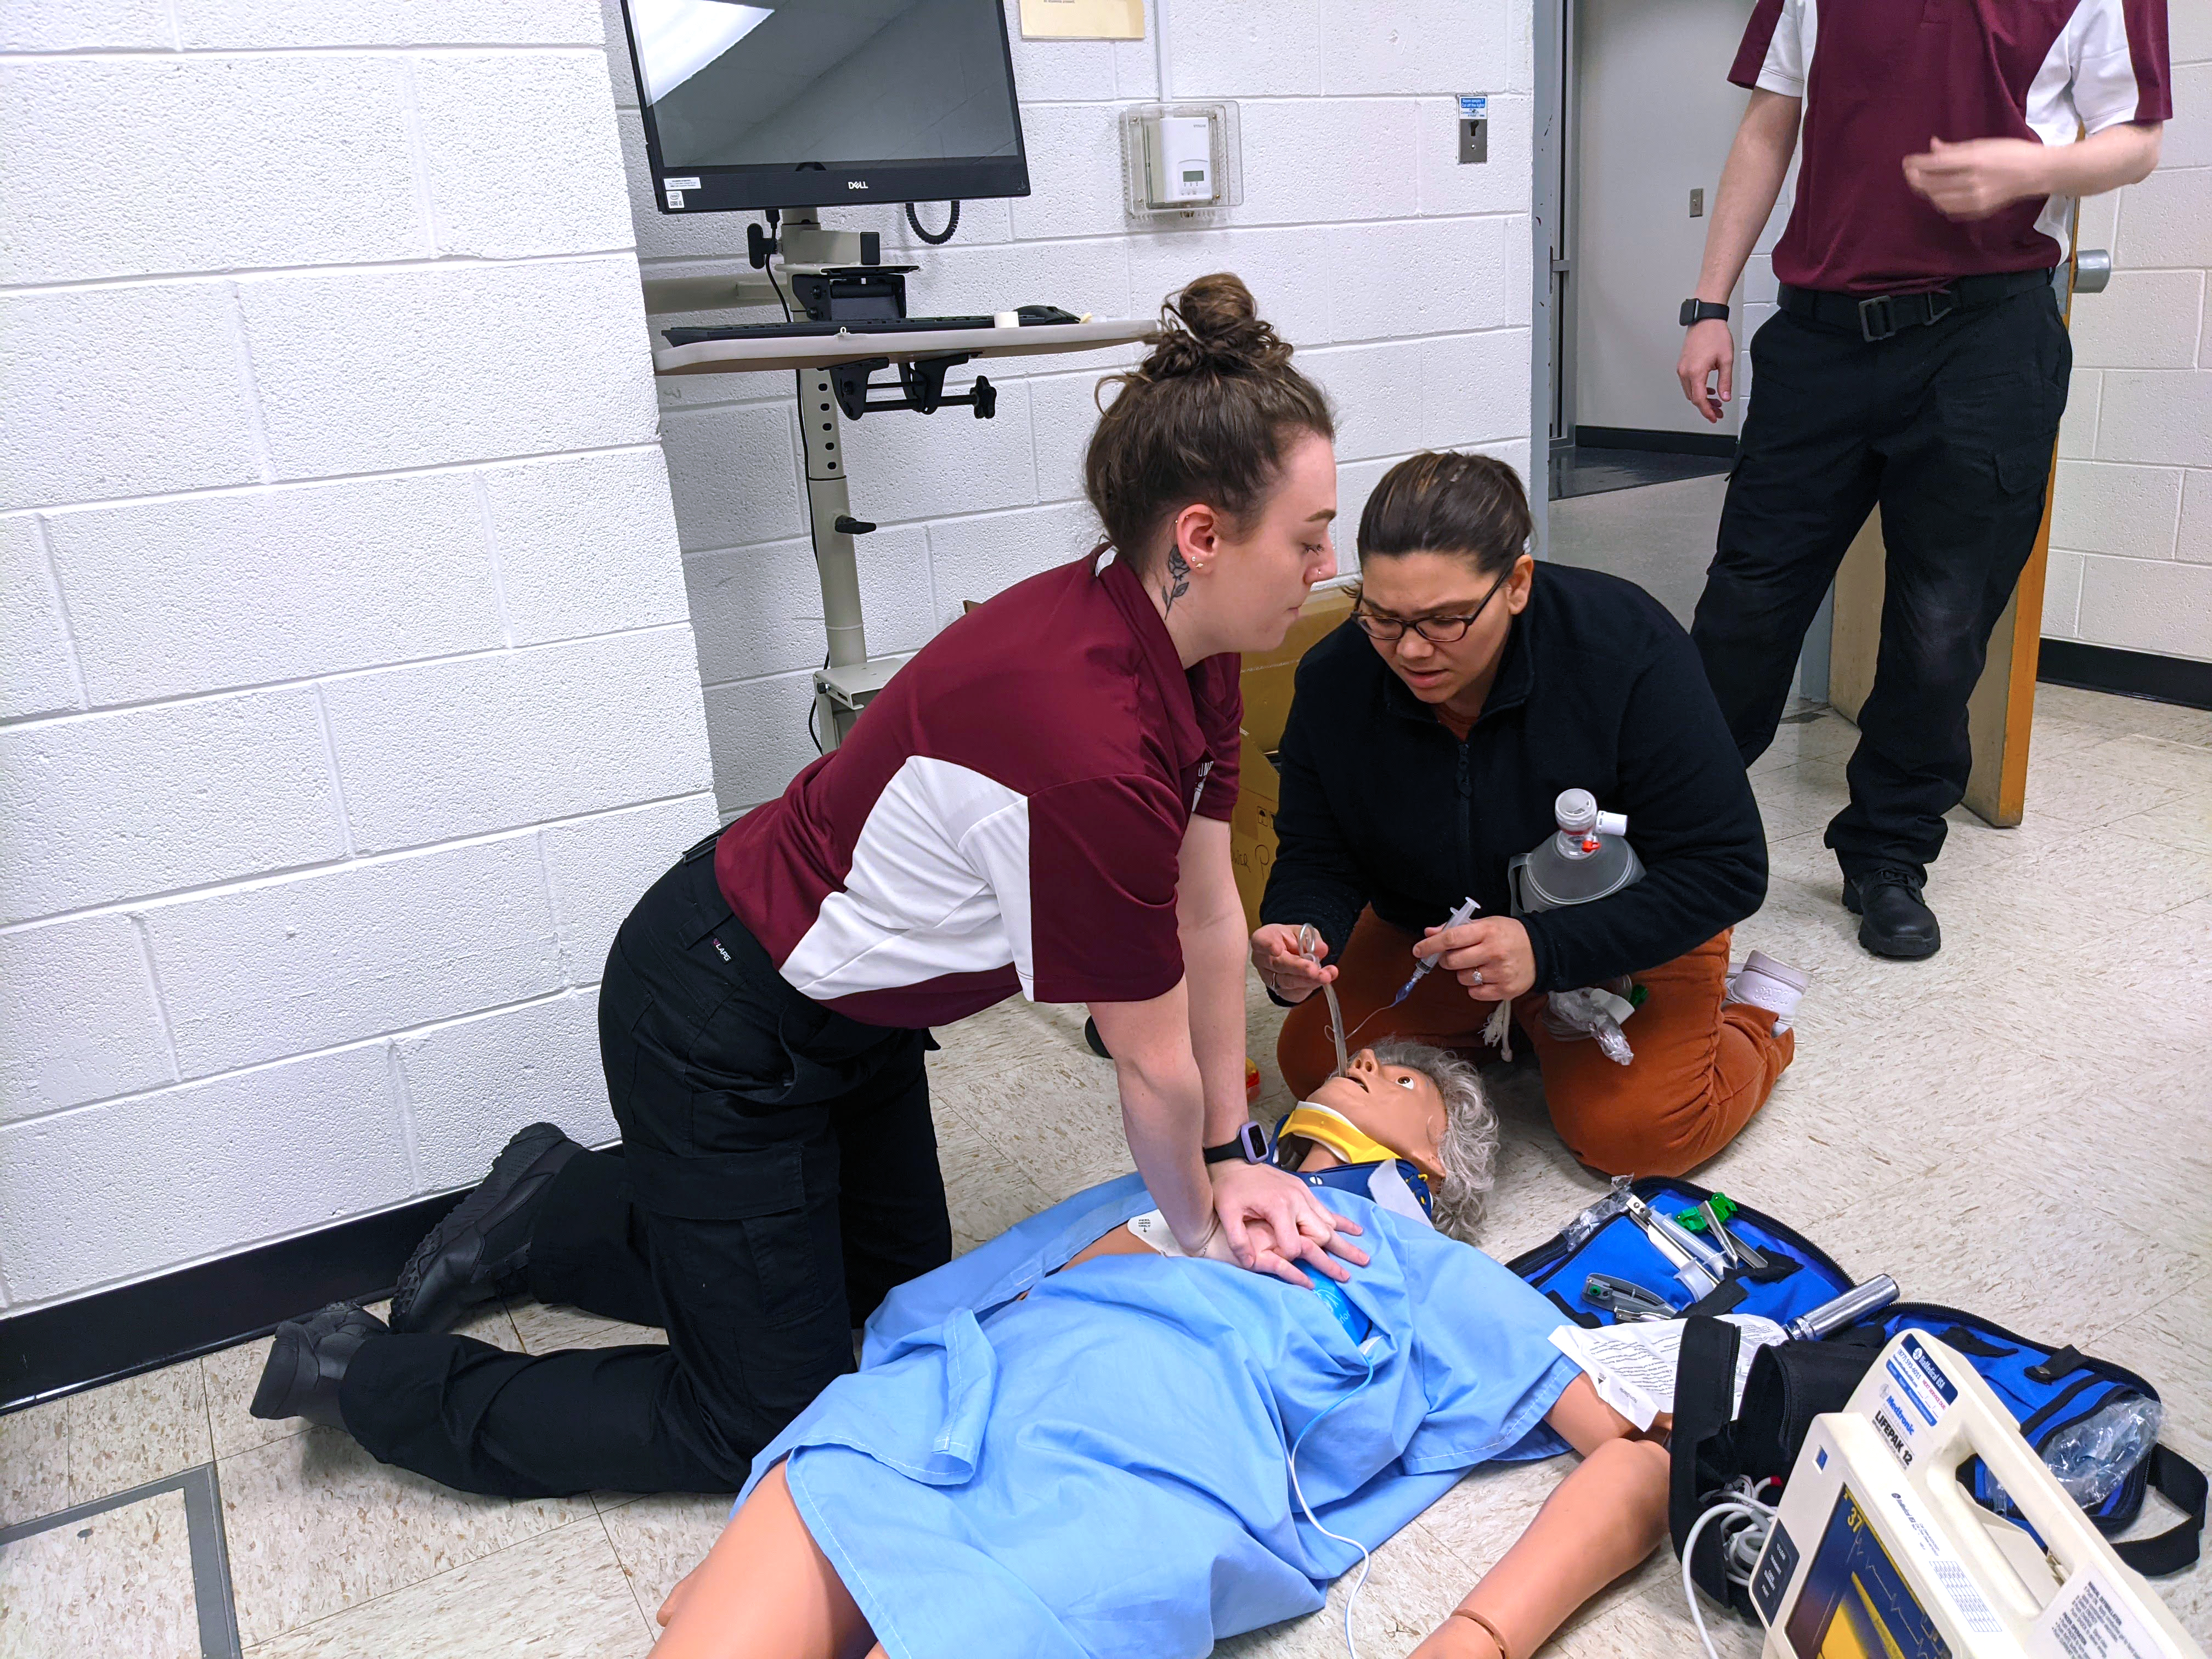 EMS students perform CPR on a mannequin